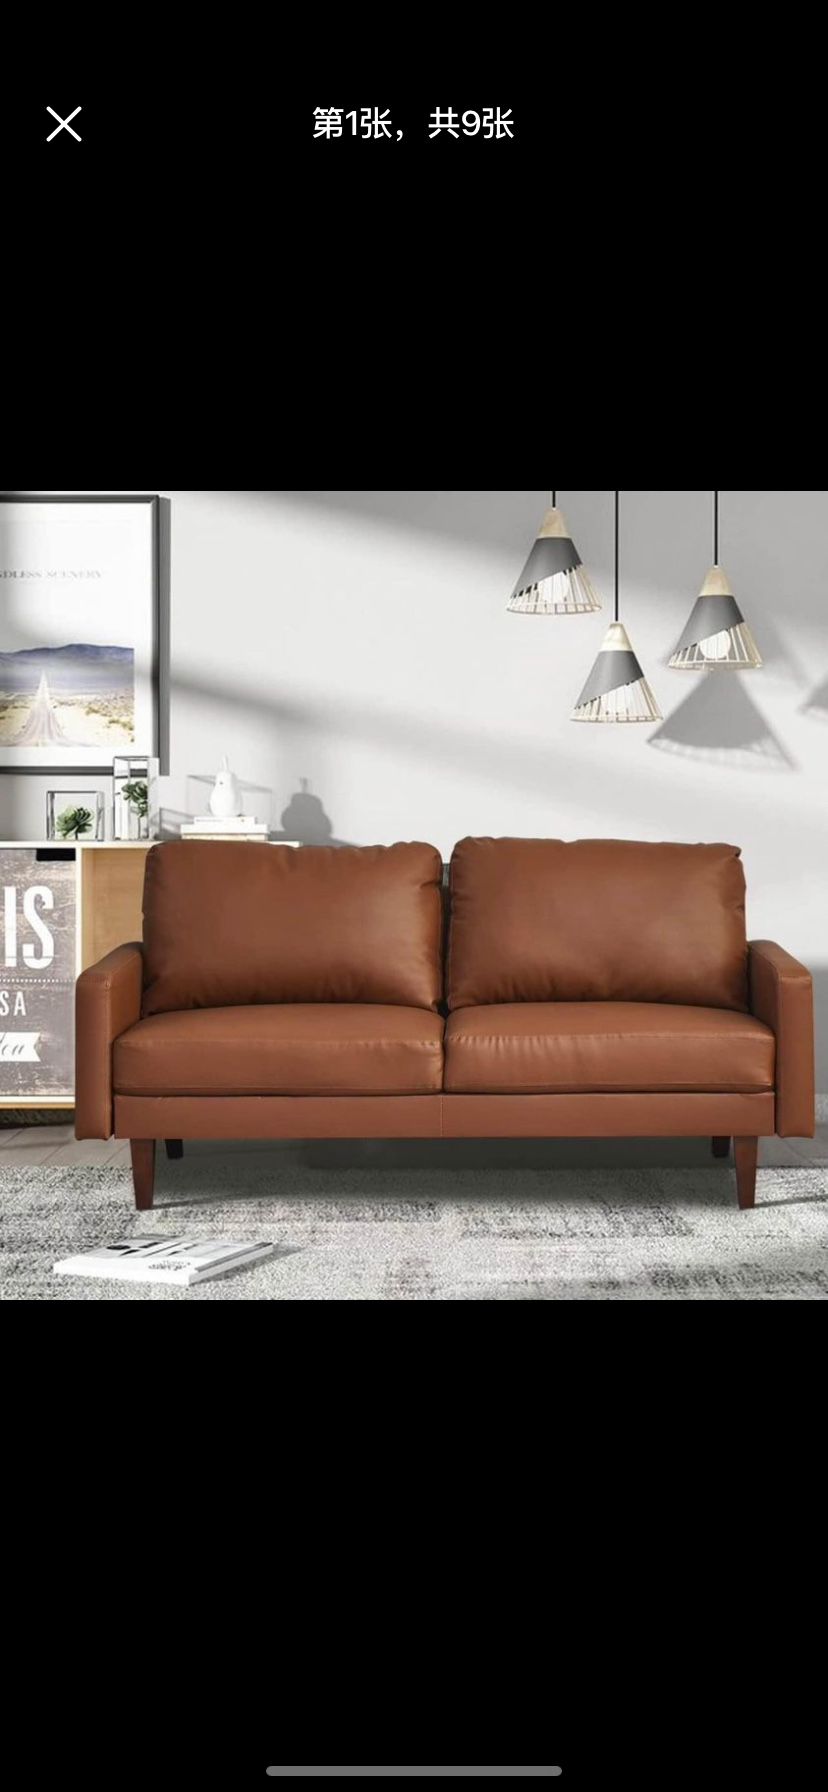 Leather Sofa Modern Couch with Wooden Legs 